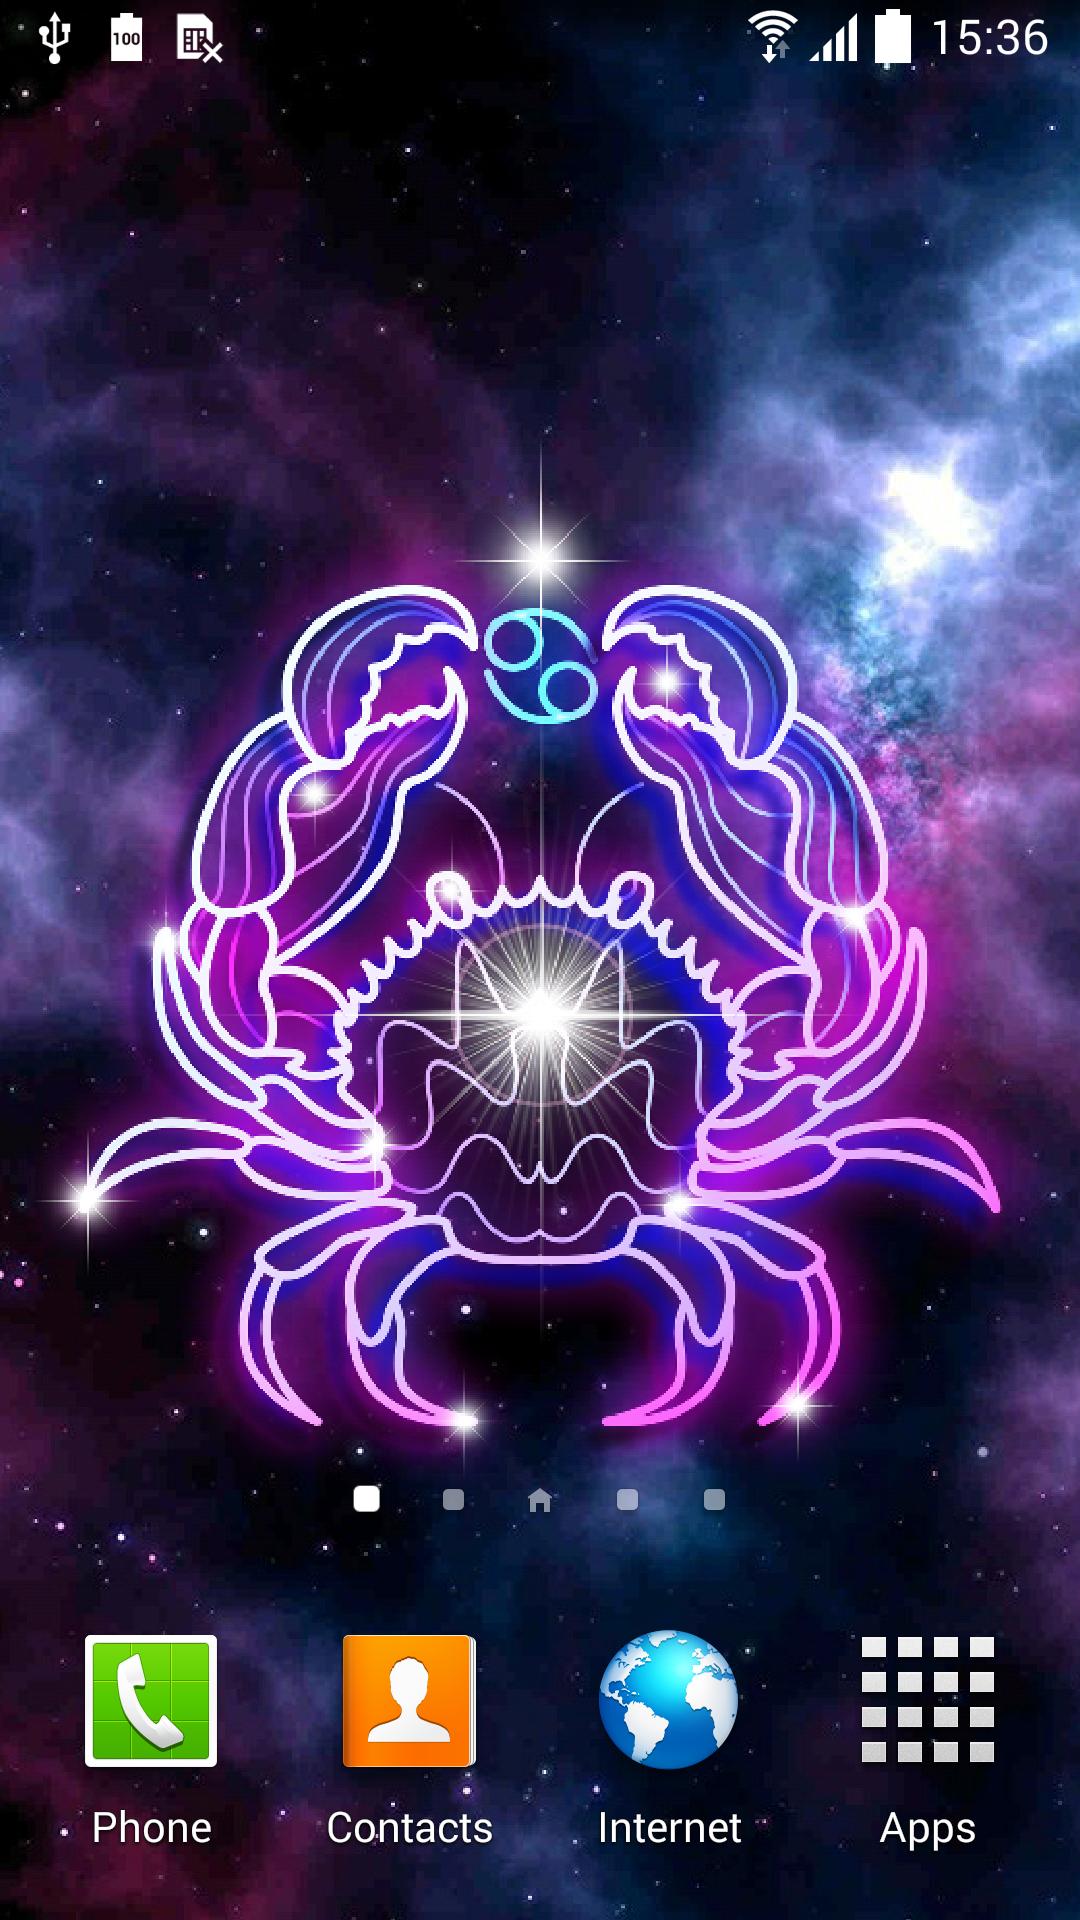 Zodiac Signs Live Wallpaper For Android Apk